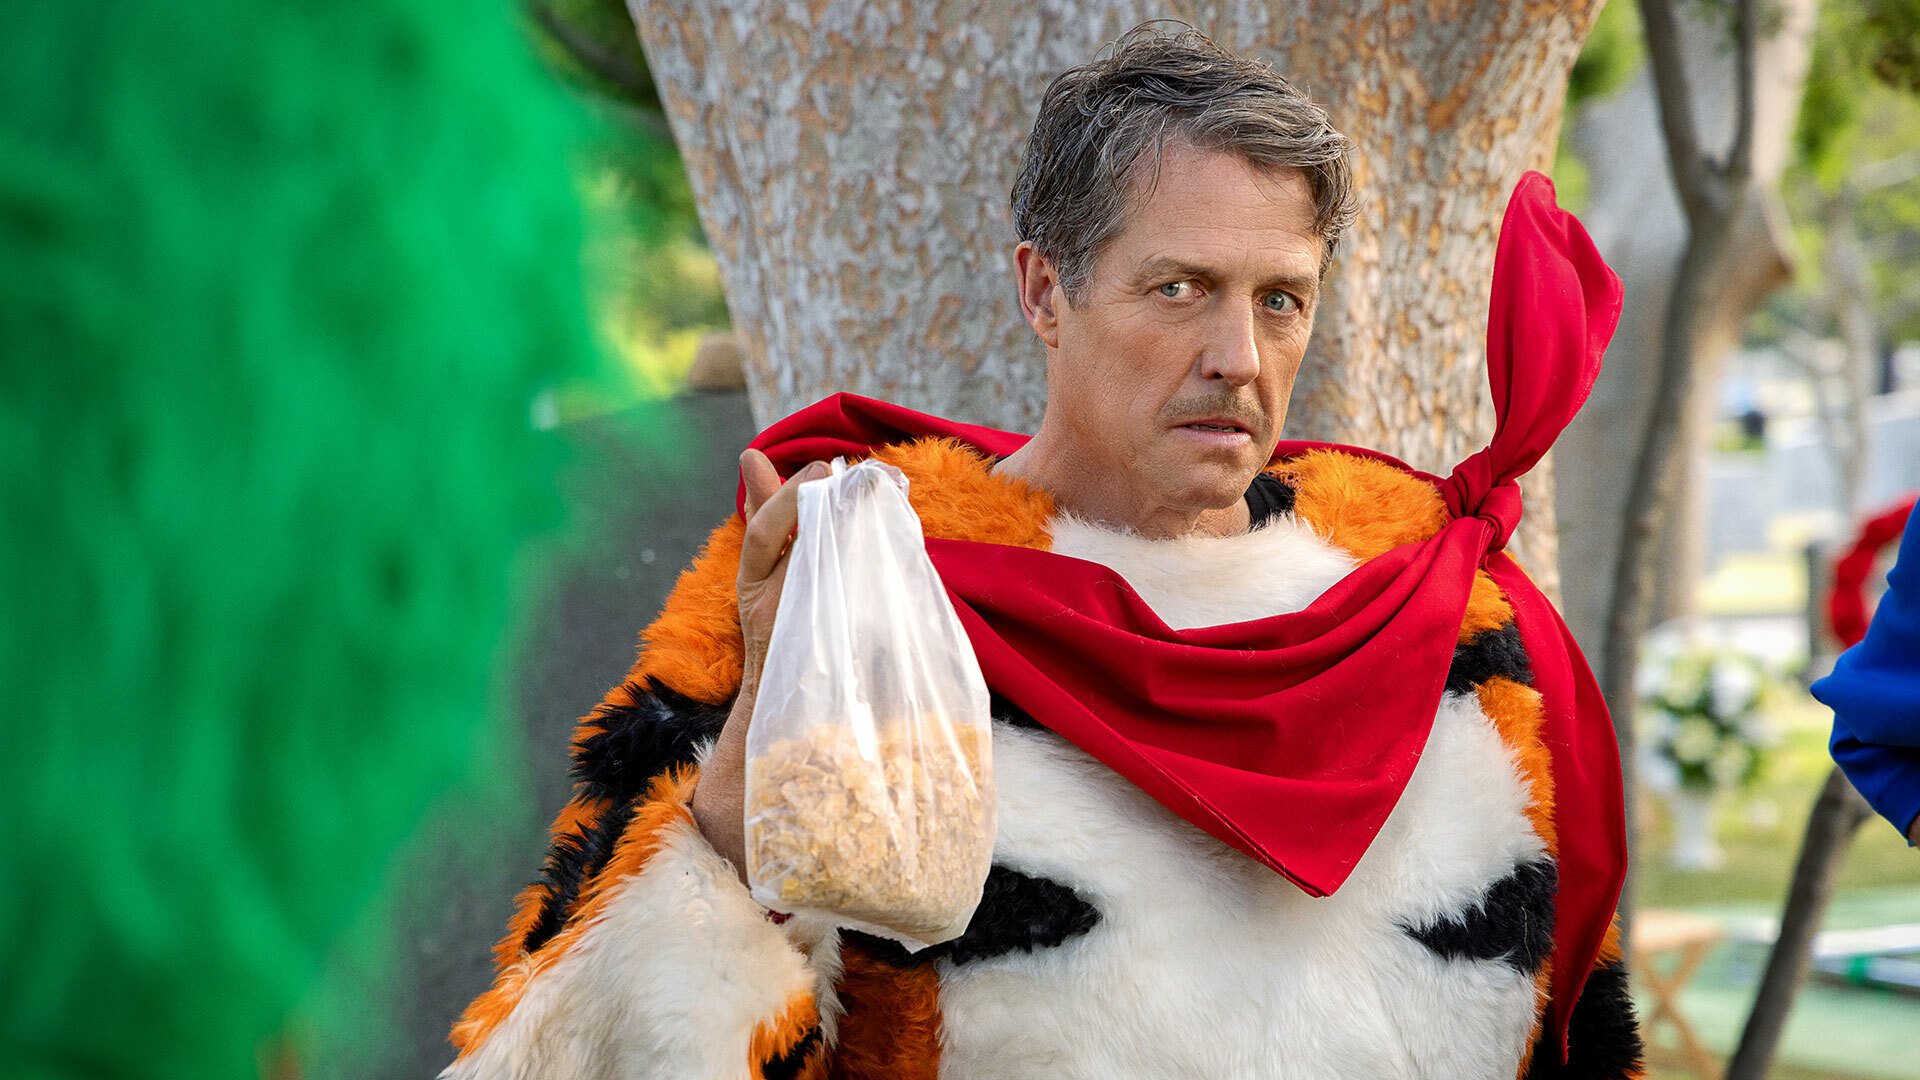 A man in a tiger costume looks angry while holding up a bag of cereal.